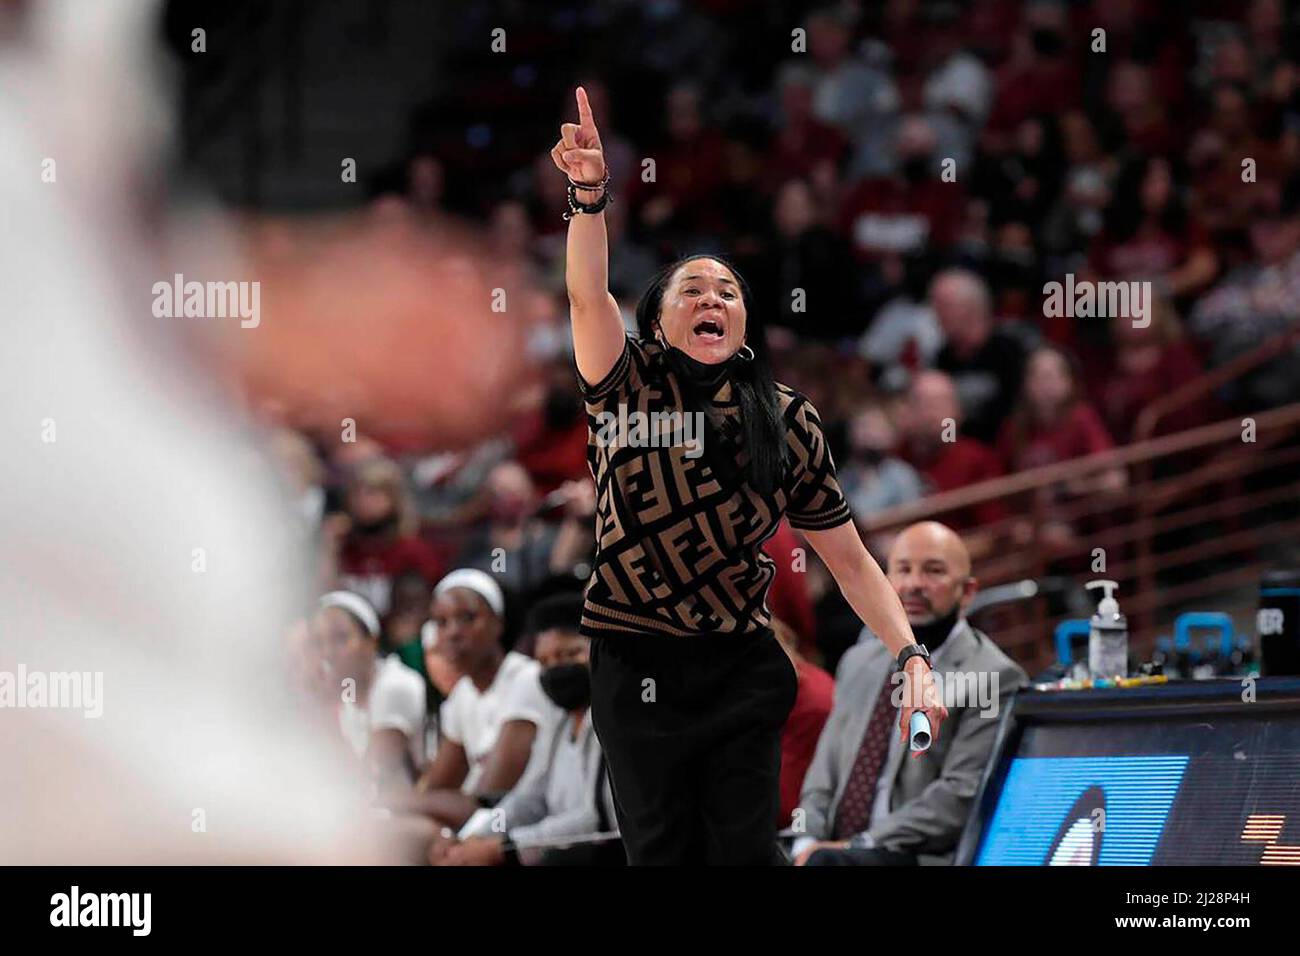 South Carolina head coach Dawn Staley reacts to a play during the first  half of an NCAA college basketball game against Missouri Sunday, Jan. 15,  2023, in Columbia, S.C. South Carolina won